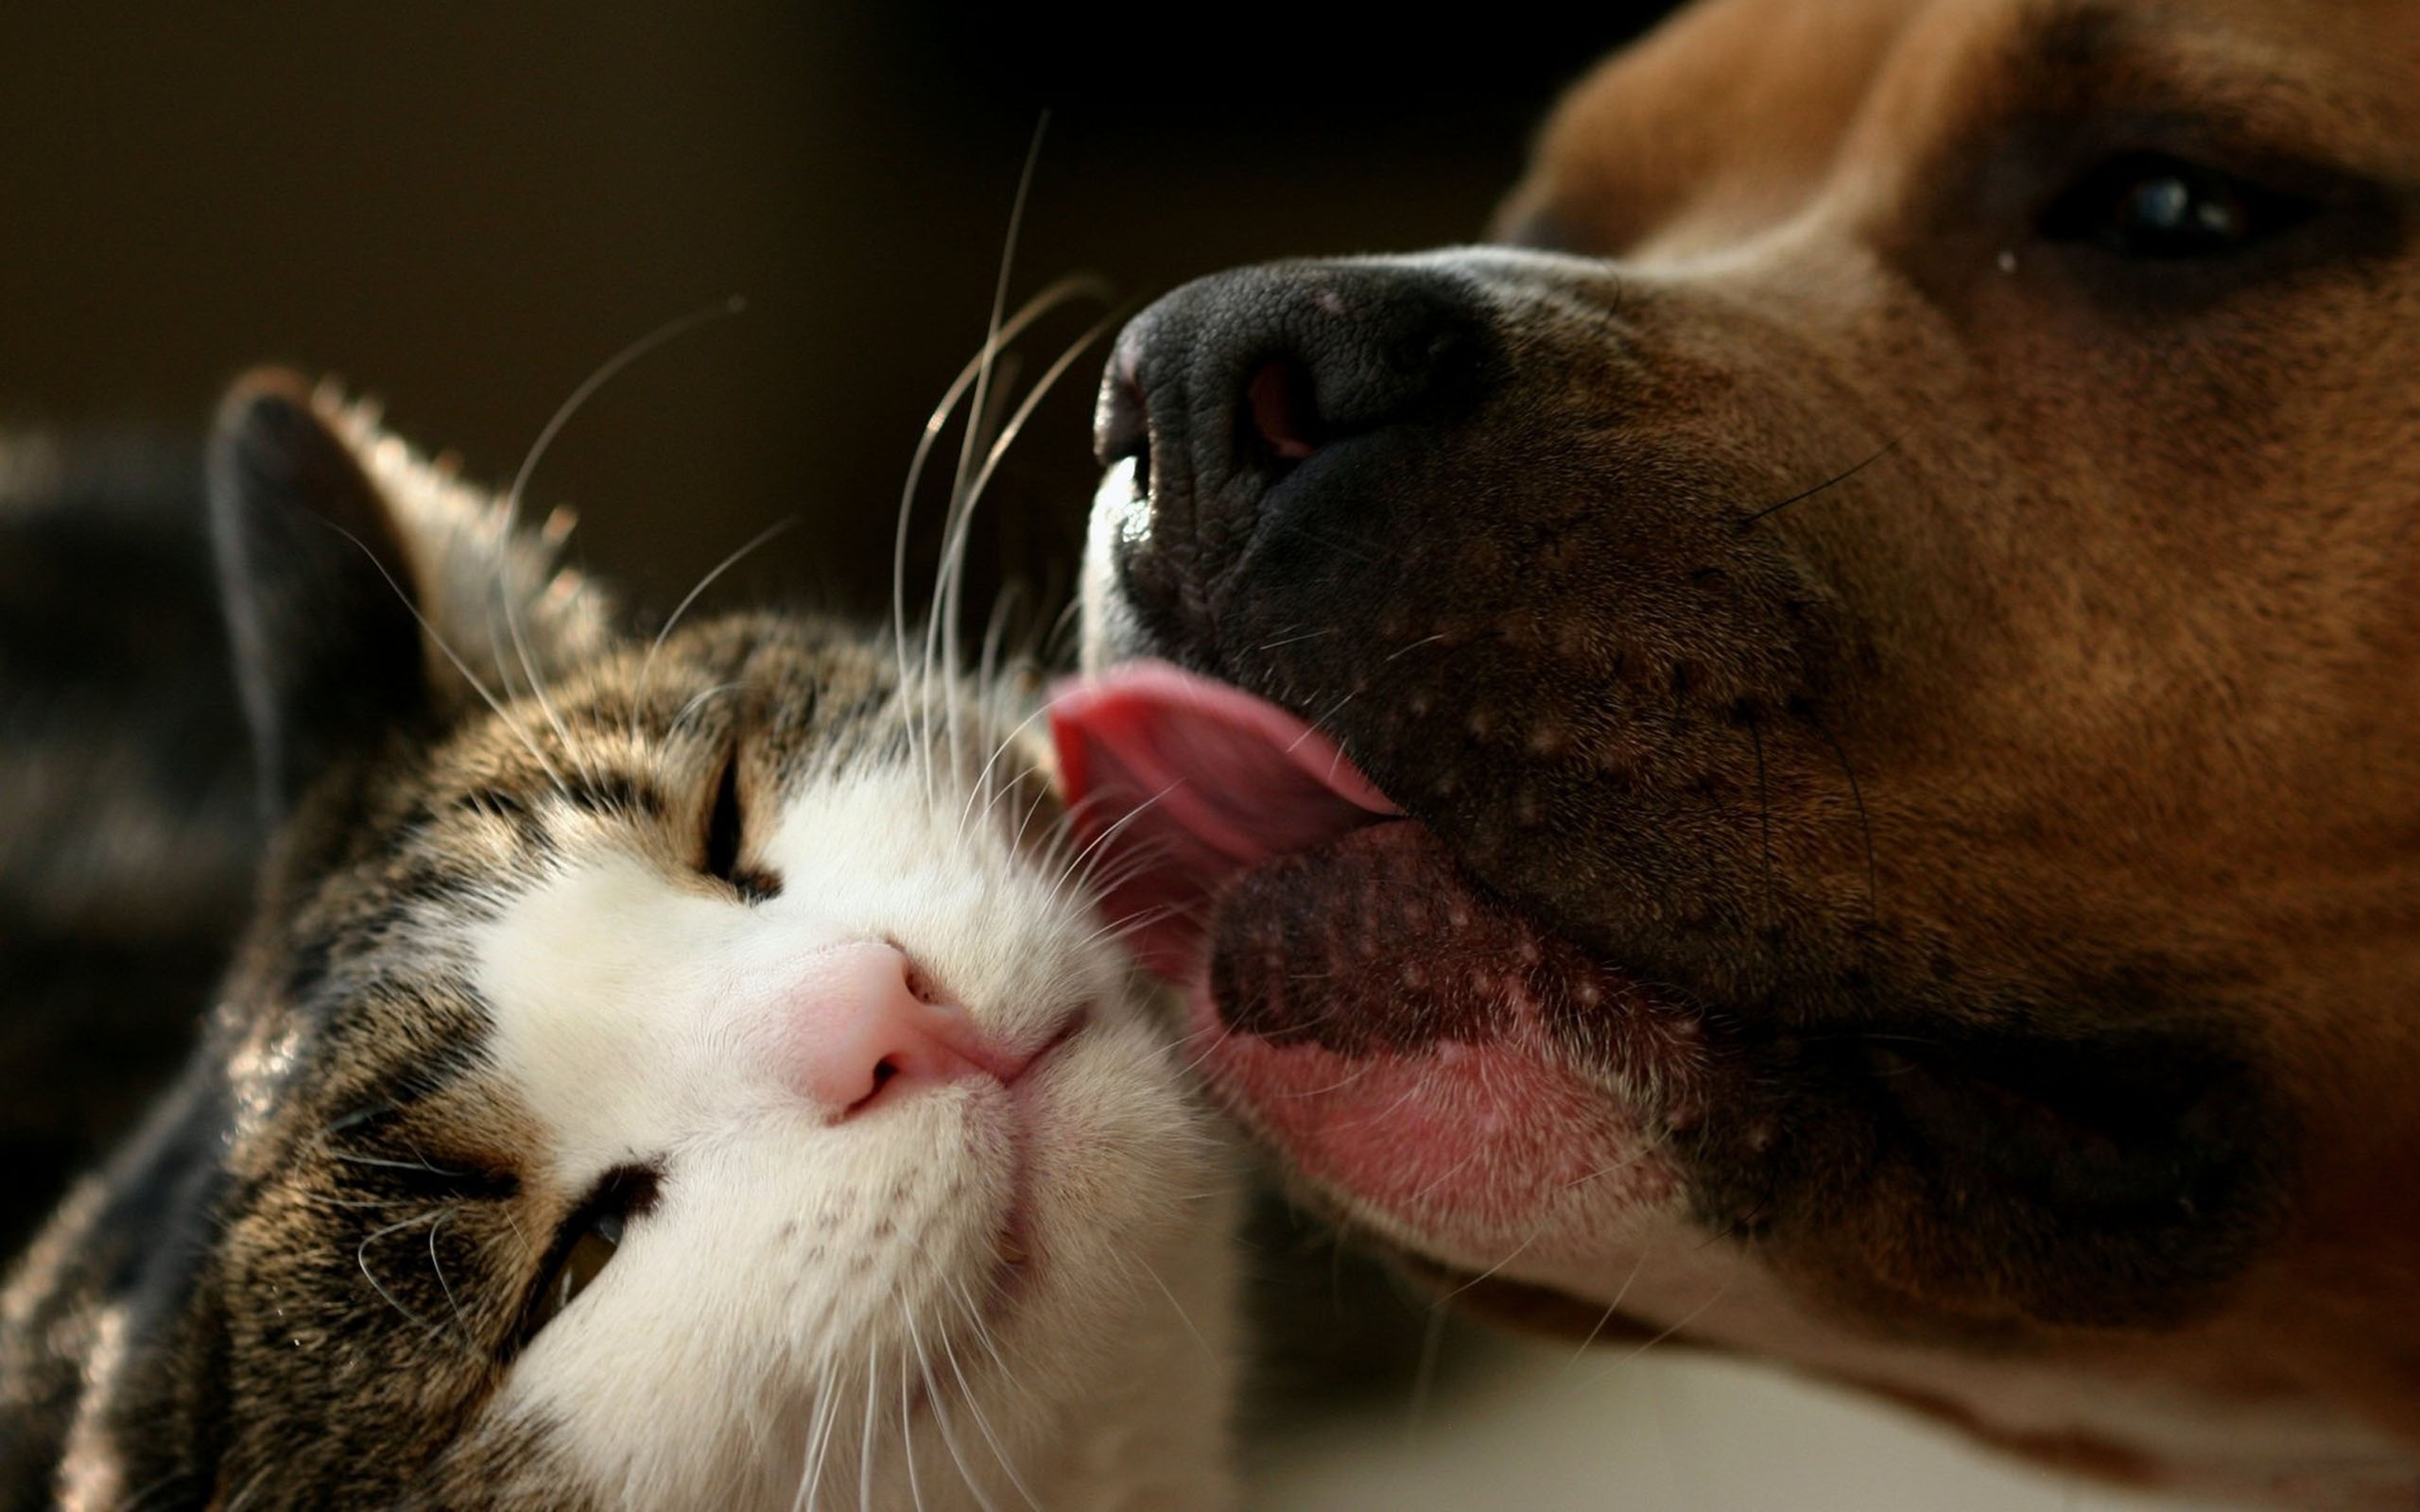  HQ Why We Love Cats And Dogs 2560x1600 Wallpaper   Free HQ Wallpapers